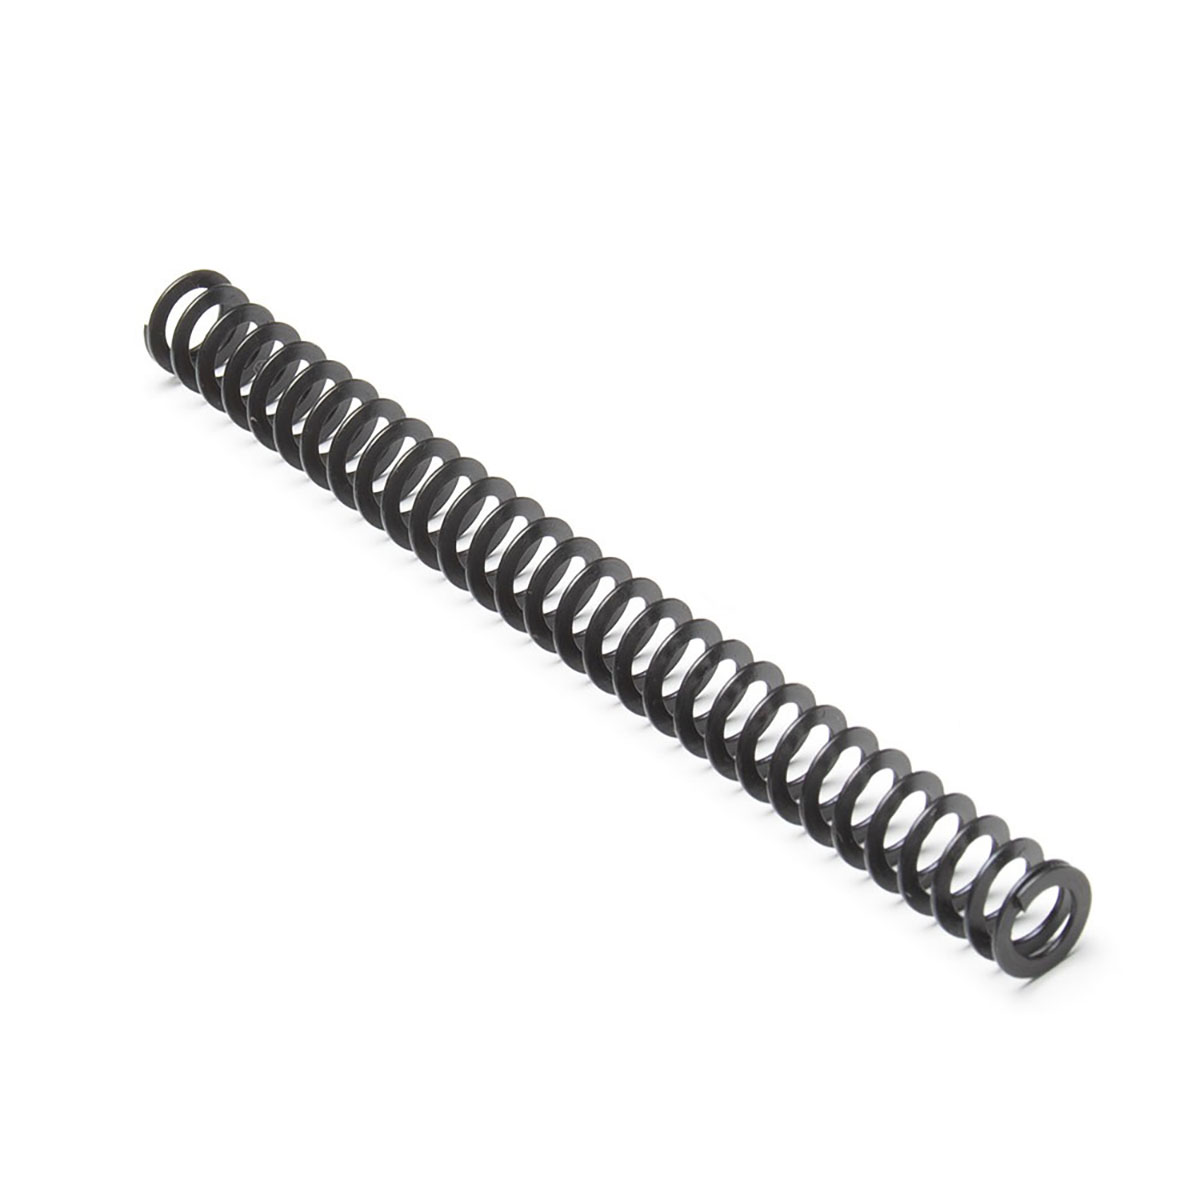 ED BROWN - 1911 45 ACP FLAT WIRE RECOIL SPRING